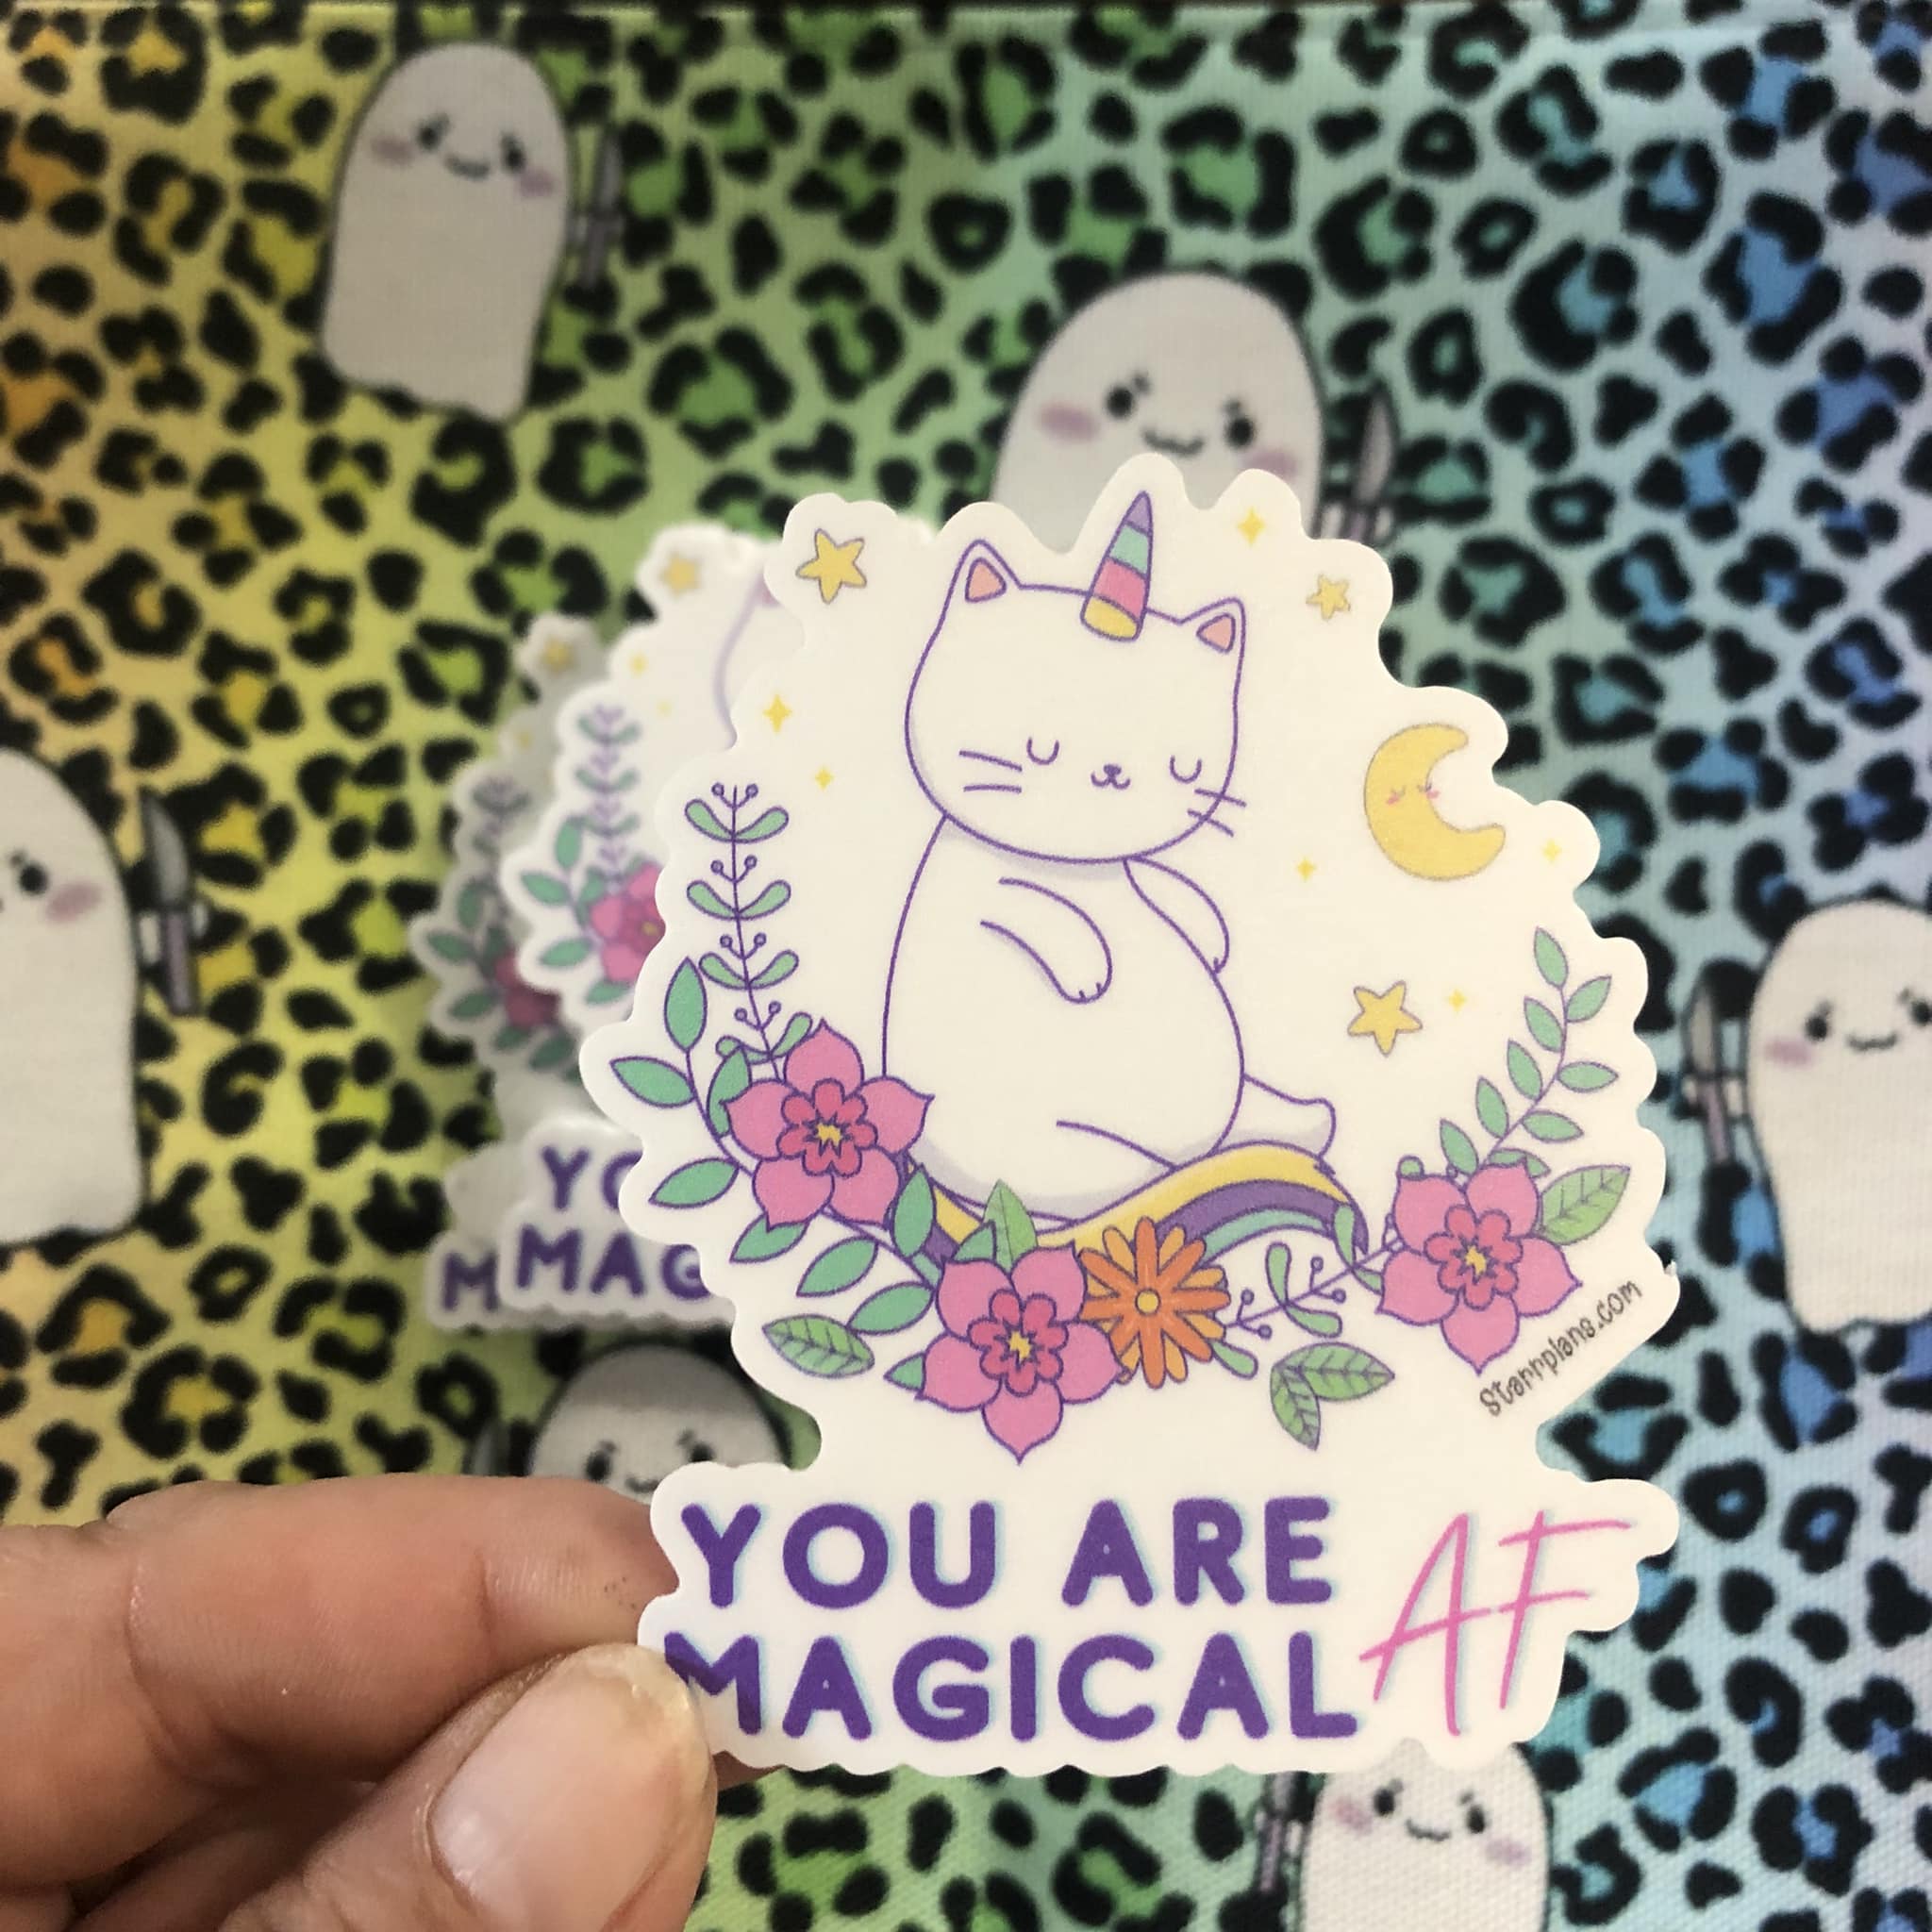 You are Magical Af Caticorn || Single Vinyl Sticker || Unicorn || Affirmation || Starr Plans Exclusives